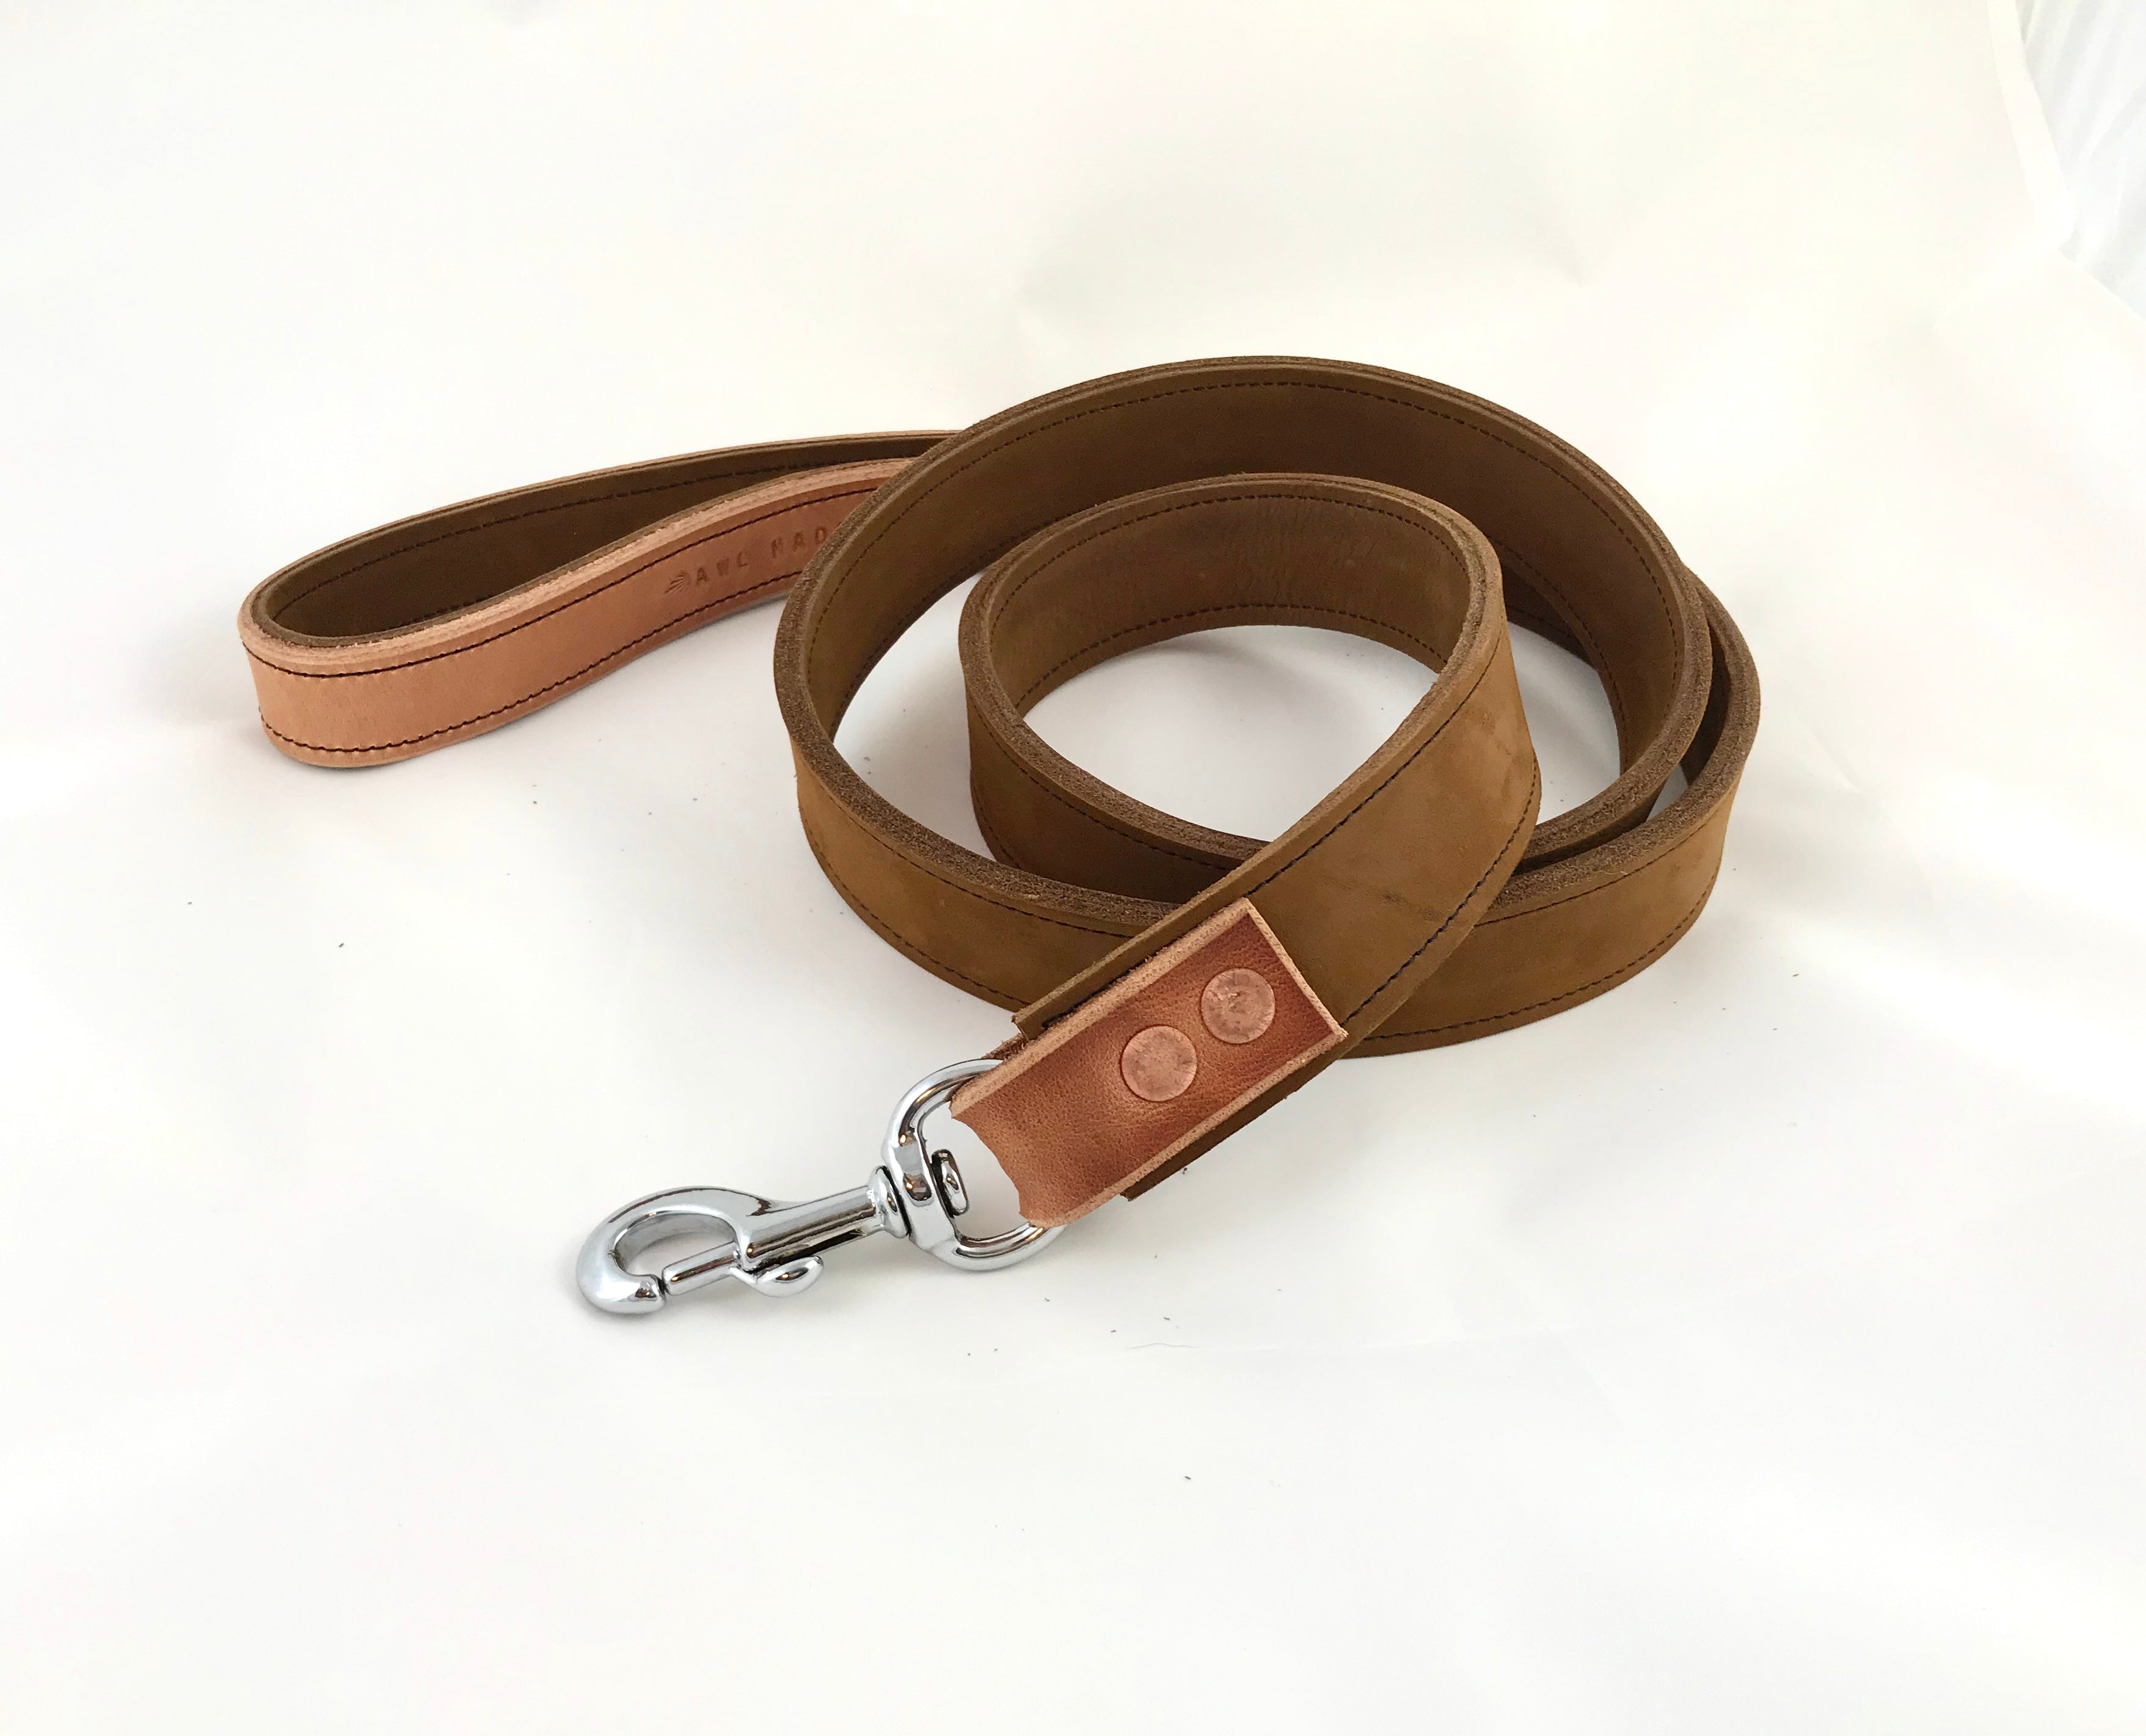 The Whiskey River Leash